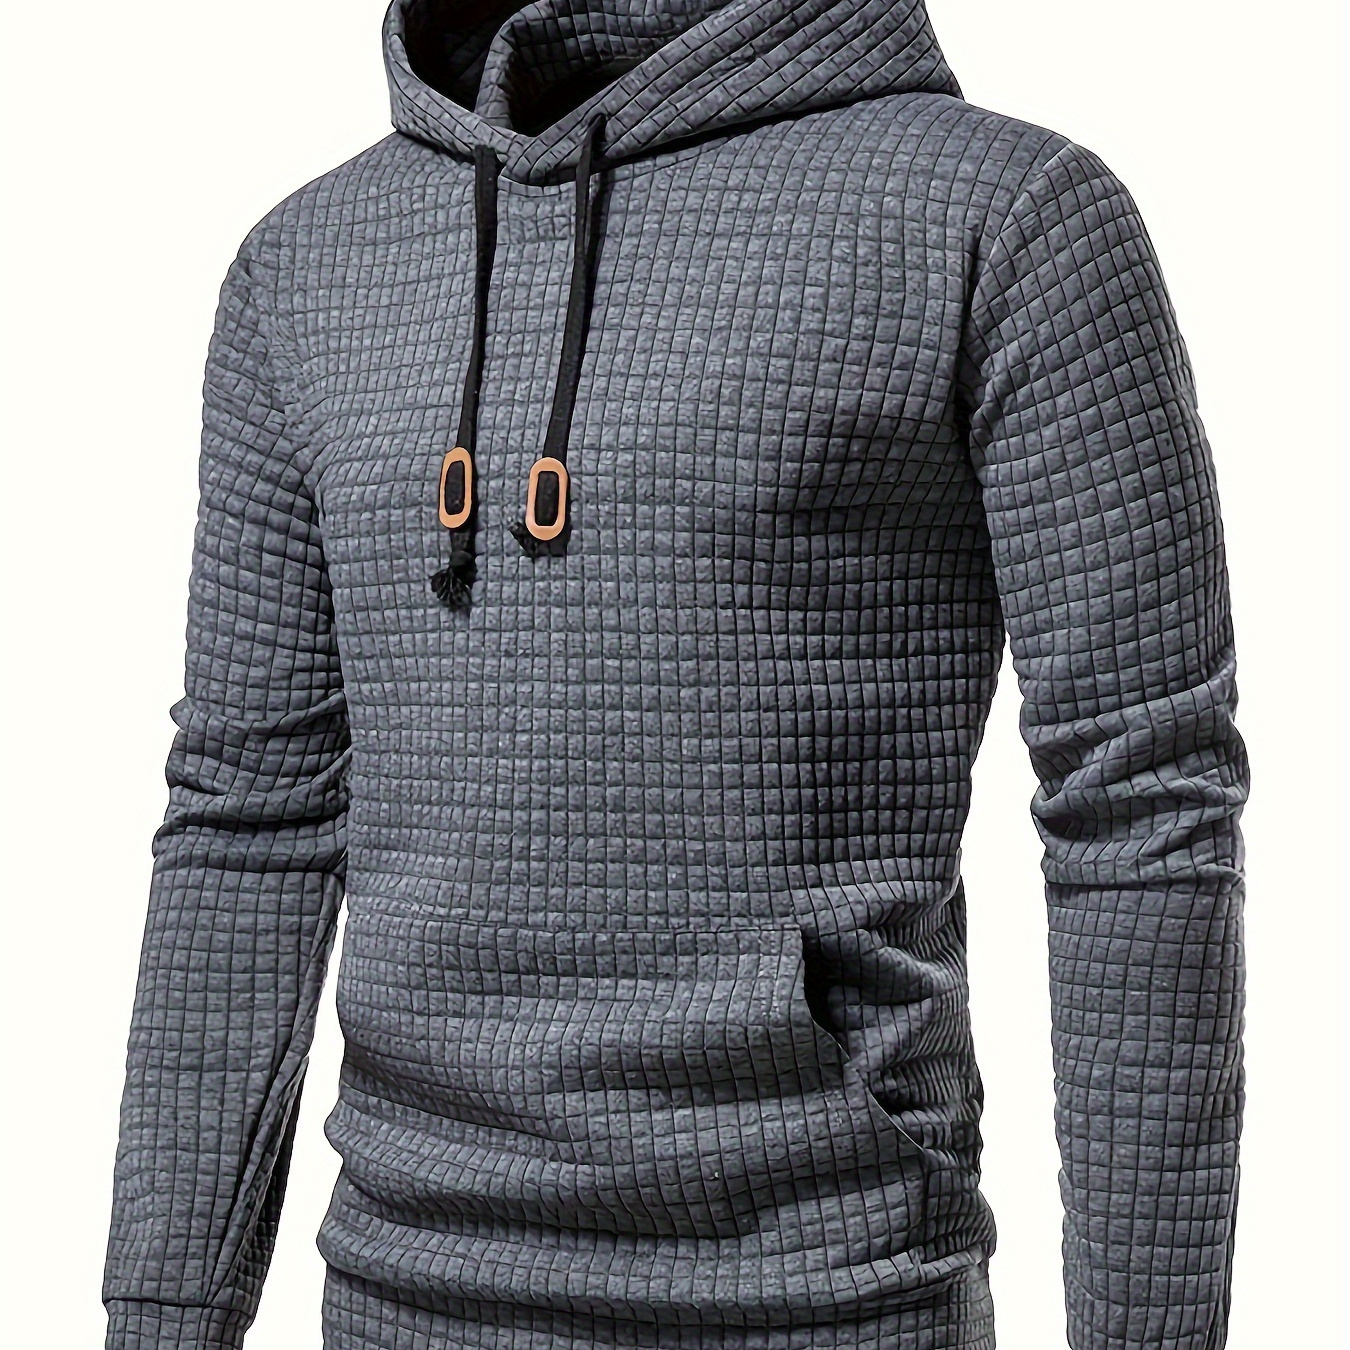 

Waffle Pattern Hoodie, Cool Hoodies For Men, Men's Casual Solid Pullover Hooded Sweatshirt With Kangaroo Pocket Streetwear For Winter Fall, As Gifts